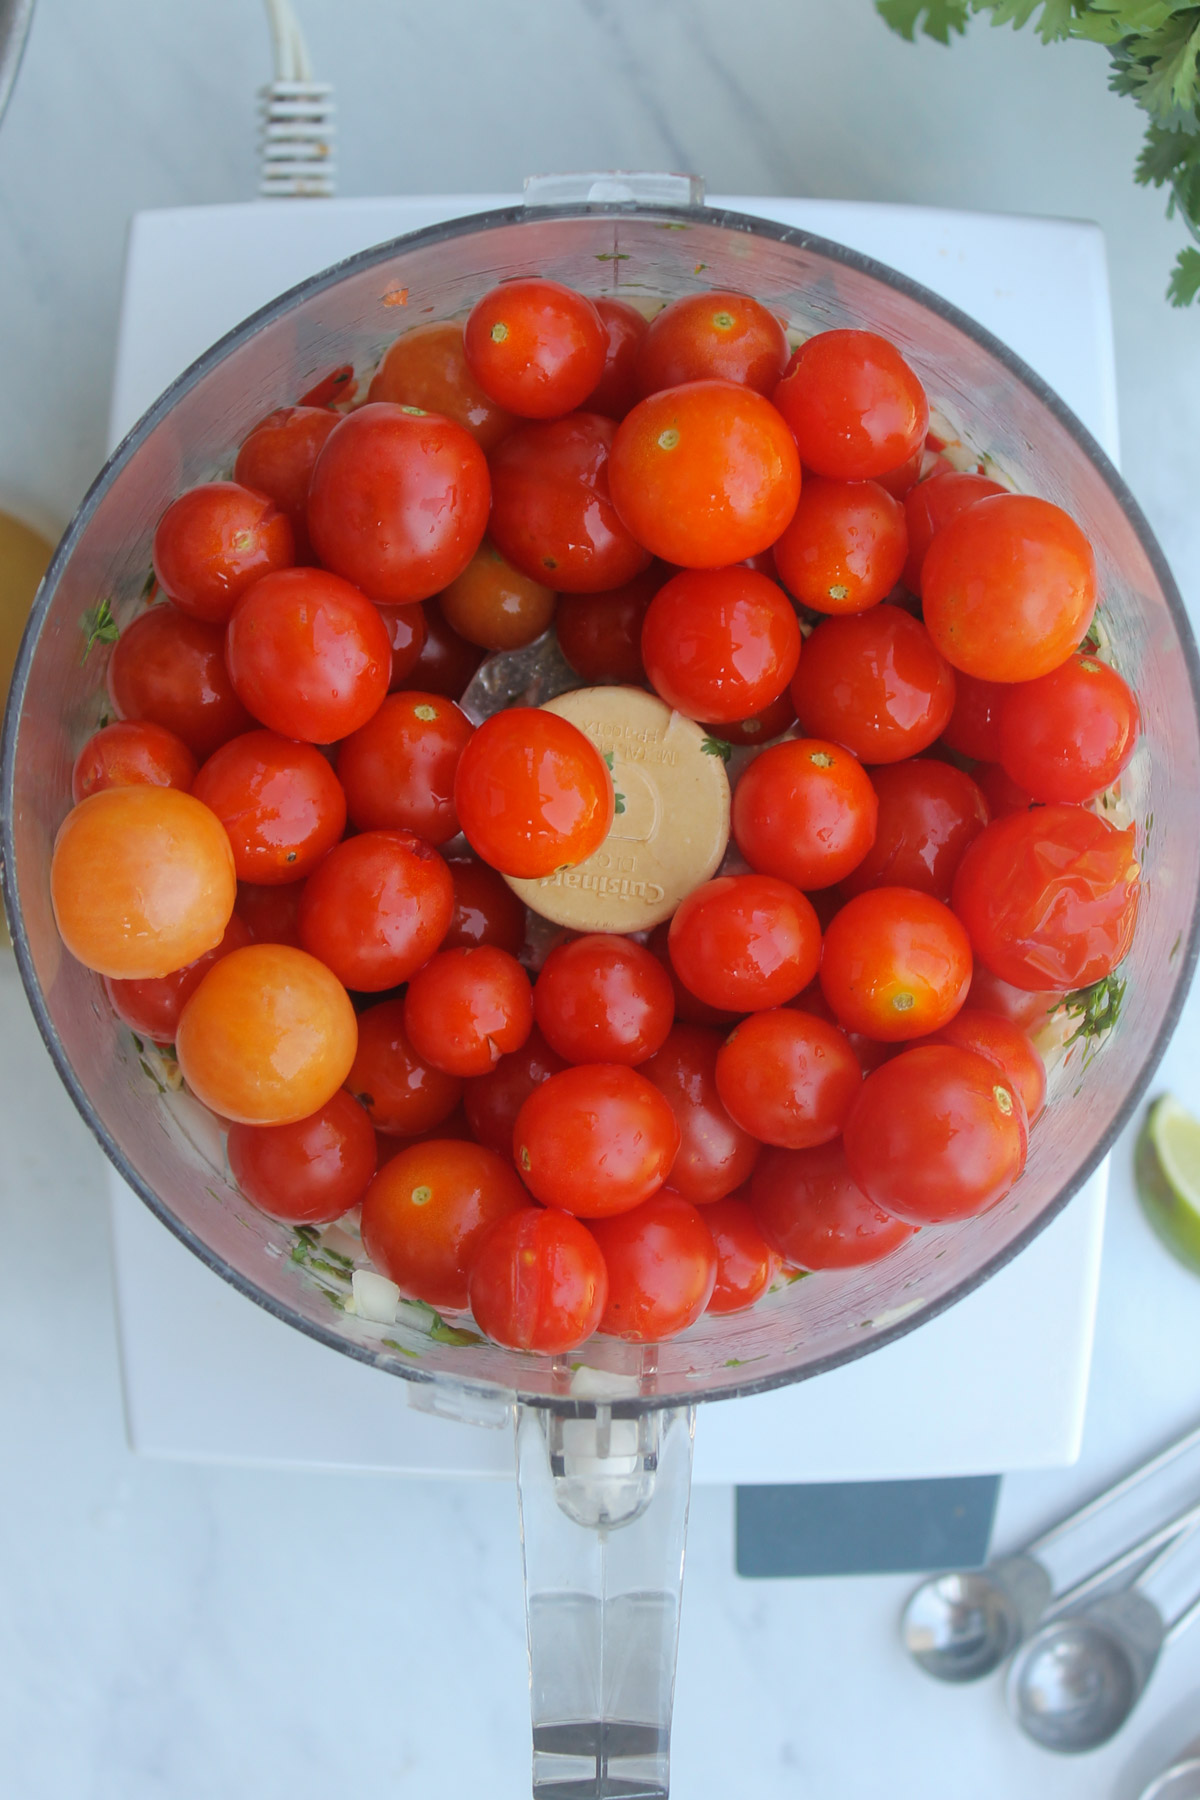 Adding cherry tomatoes to the pulsed veggies in a food processor.